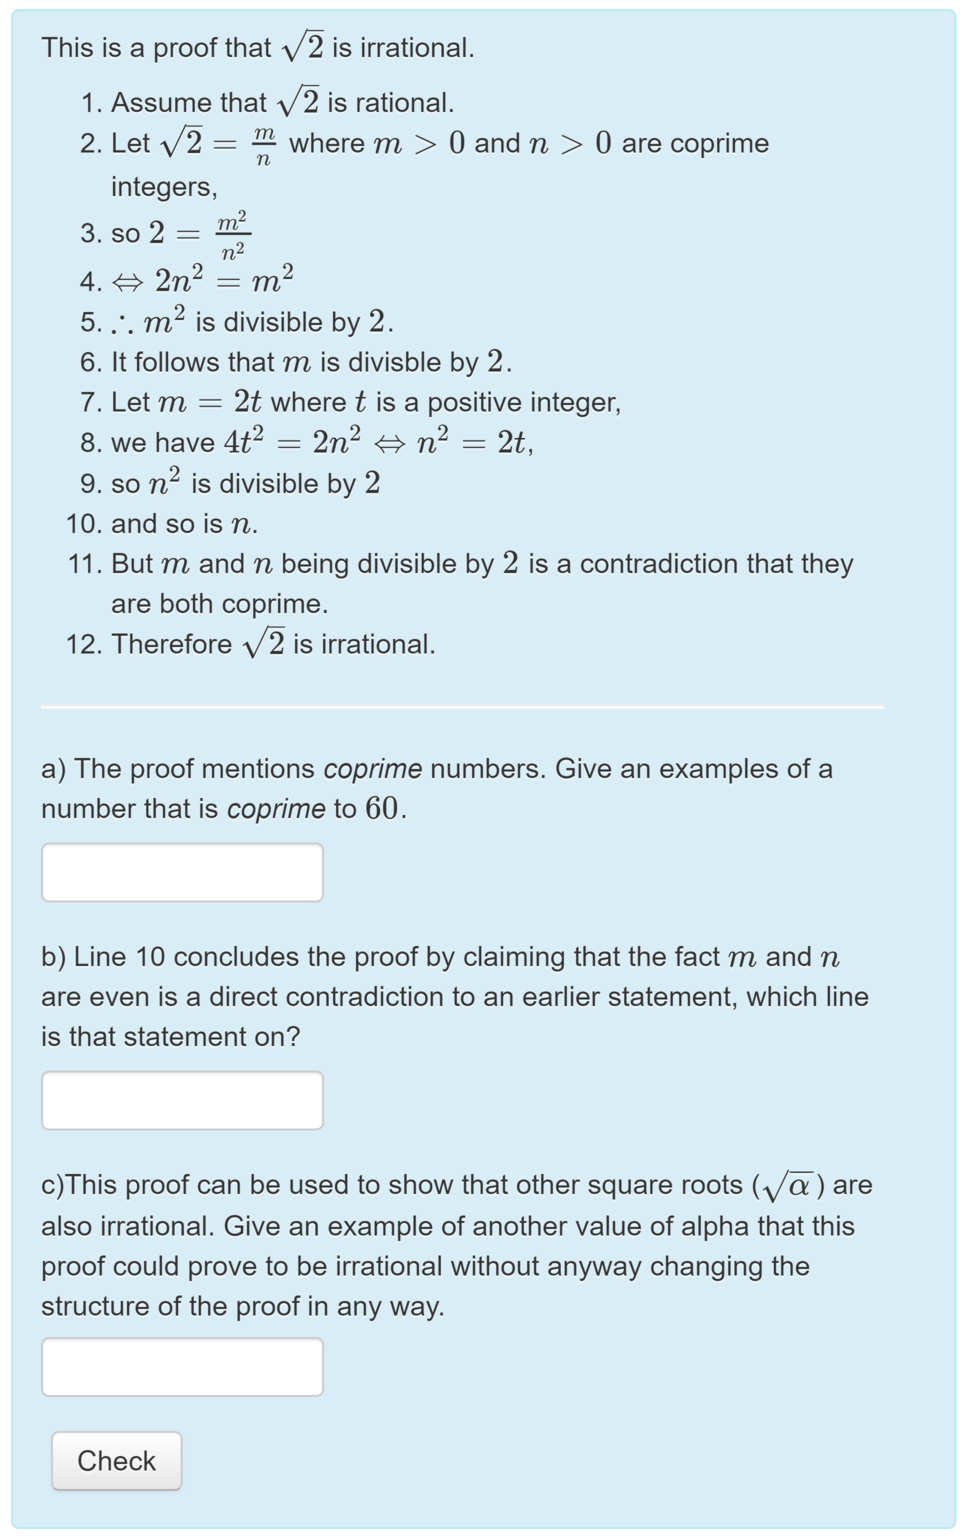 A proof in 12 steps for why the square root of 2 is irrational. Students are asked a) for an example of a number that is coprime to 60, b) to justify which earlier step is contradicted in step 10 c) giving an example of another value the proof could apply to.